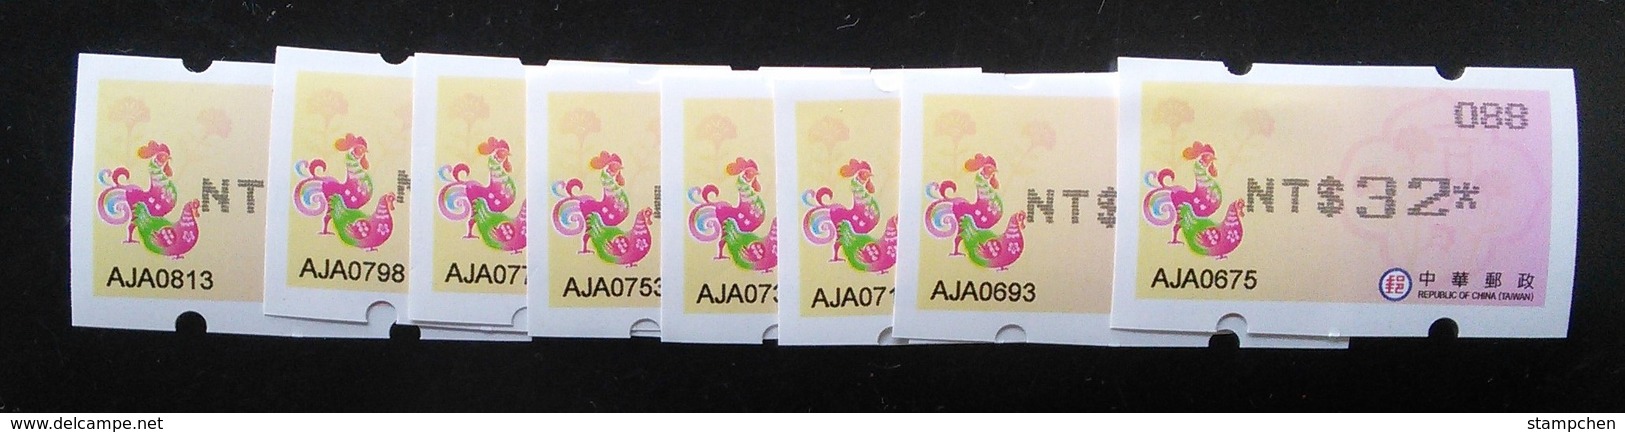 Black Imprint Set  ATM Frama Stamps-2017 Year Of Auspicious Rooster Cock Chinese New Year Unusual - Machine Labels [ATM]